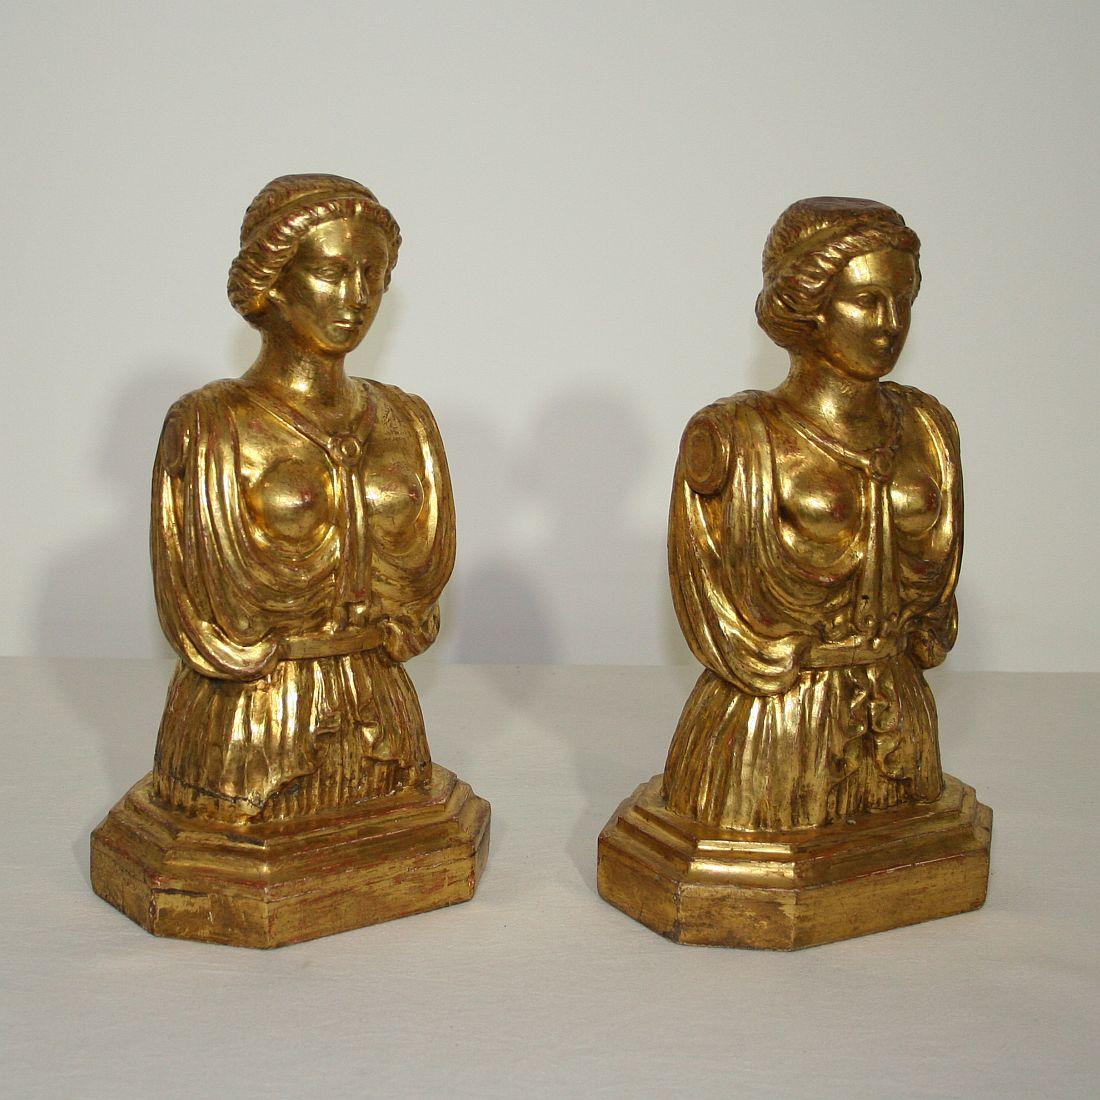 Unique couple of giltwood busts.
Italy, circa 1780. Beautiful weathered, small losses and old repairs.
More photo's available on request.